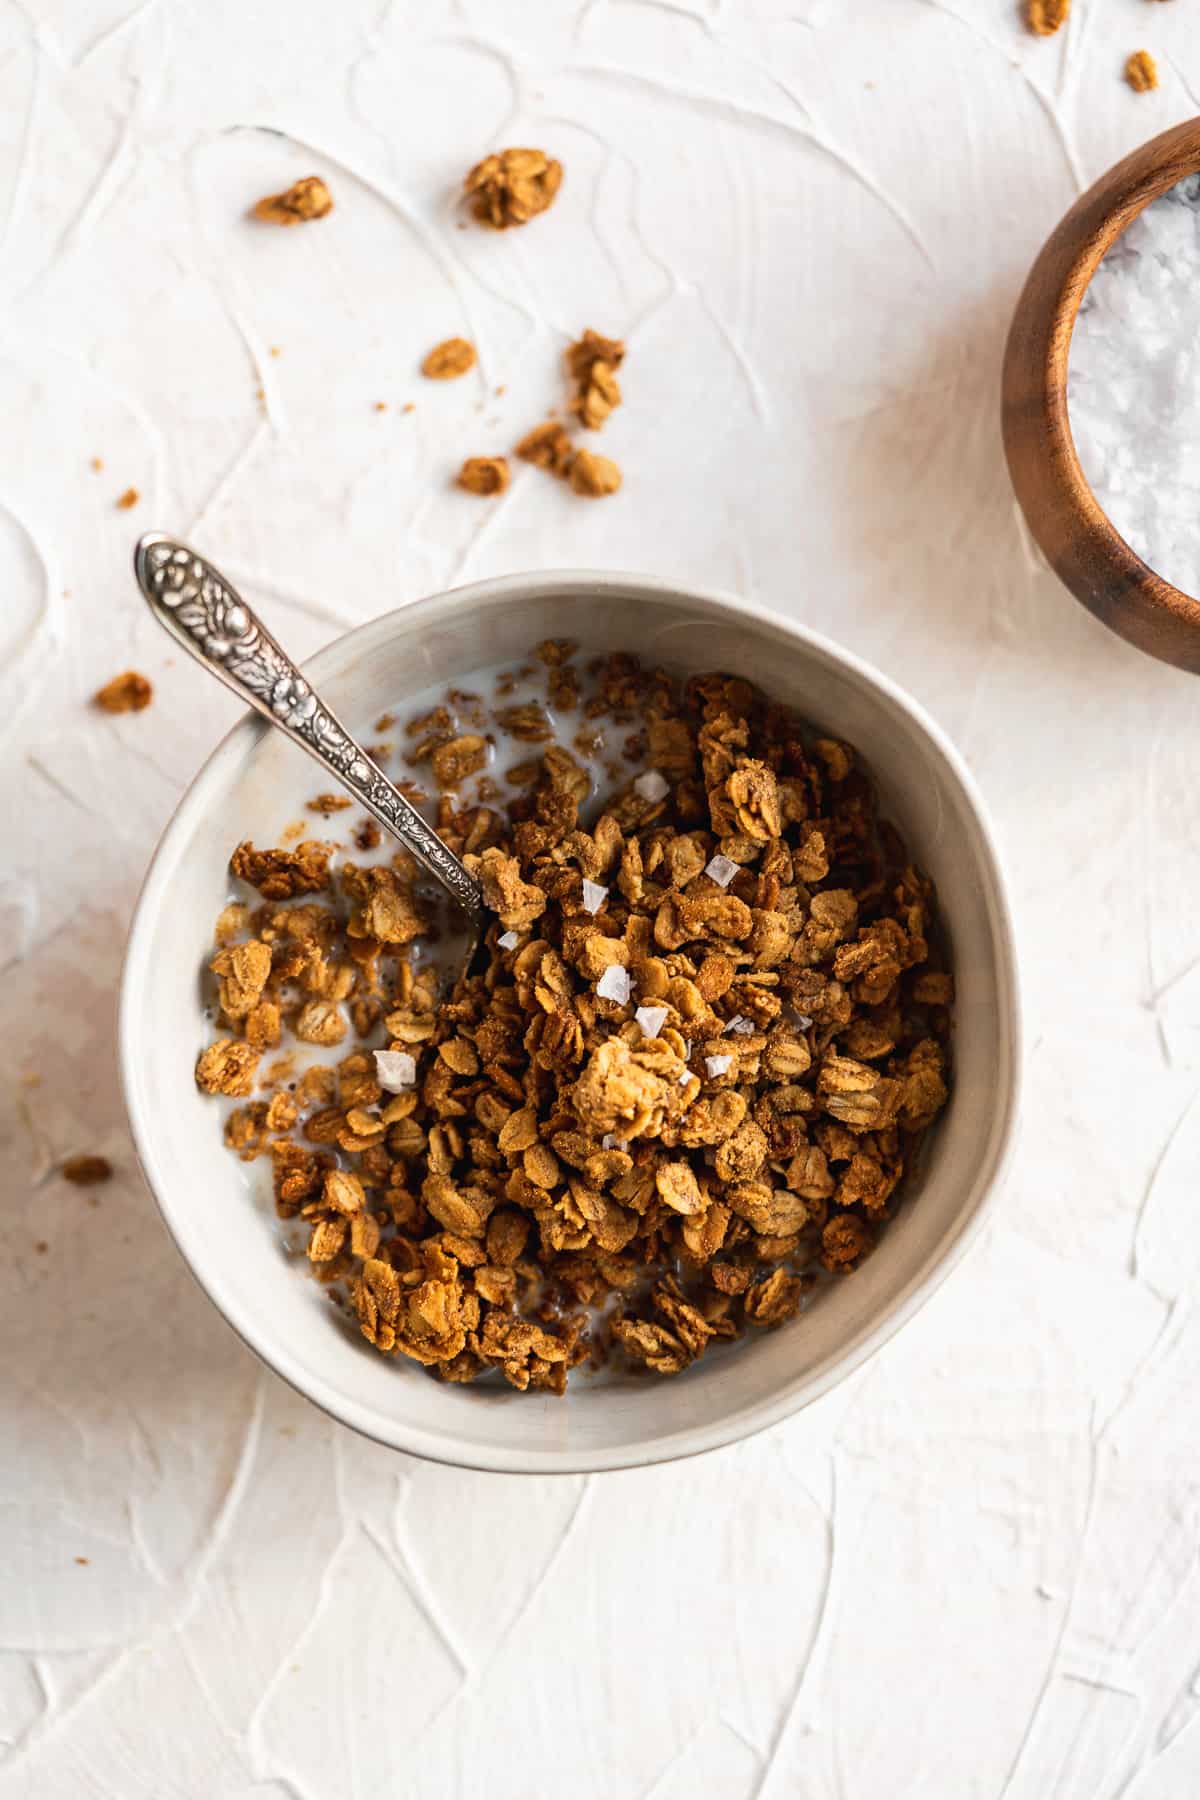 An overhead photo of a bowl of Maple Sea Salt Nut-free Granola topped with milk ready to be enjoyed.  A silver spoon is in the bowl.  